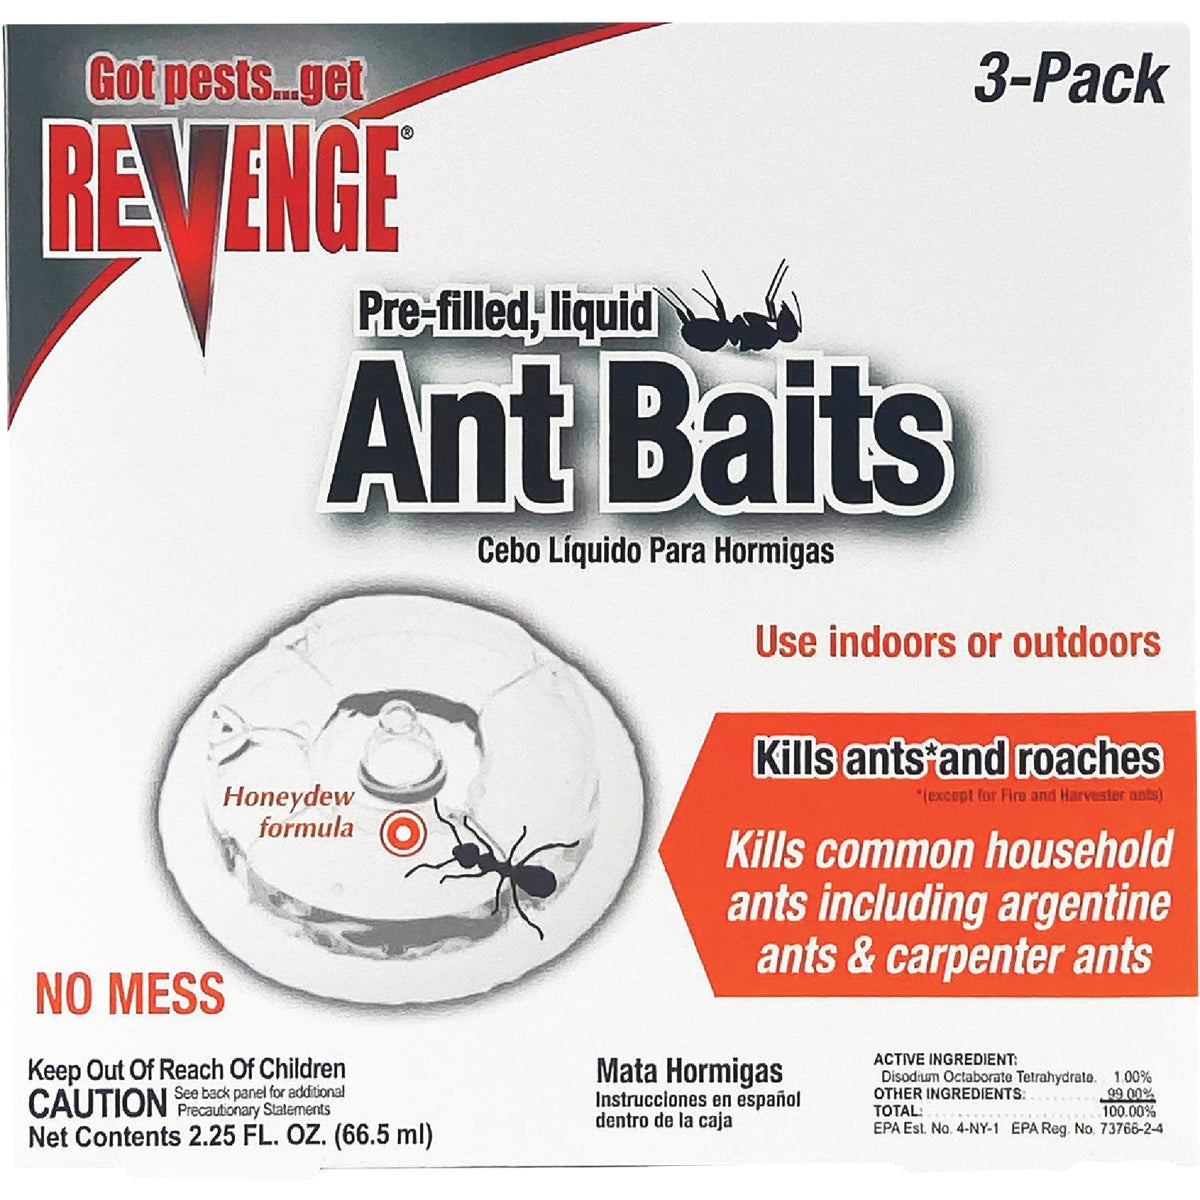 Item 702079, Pack of 3 pre-filled liquid bait stations ideal for use both indoors and 